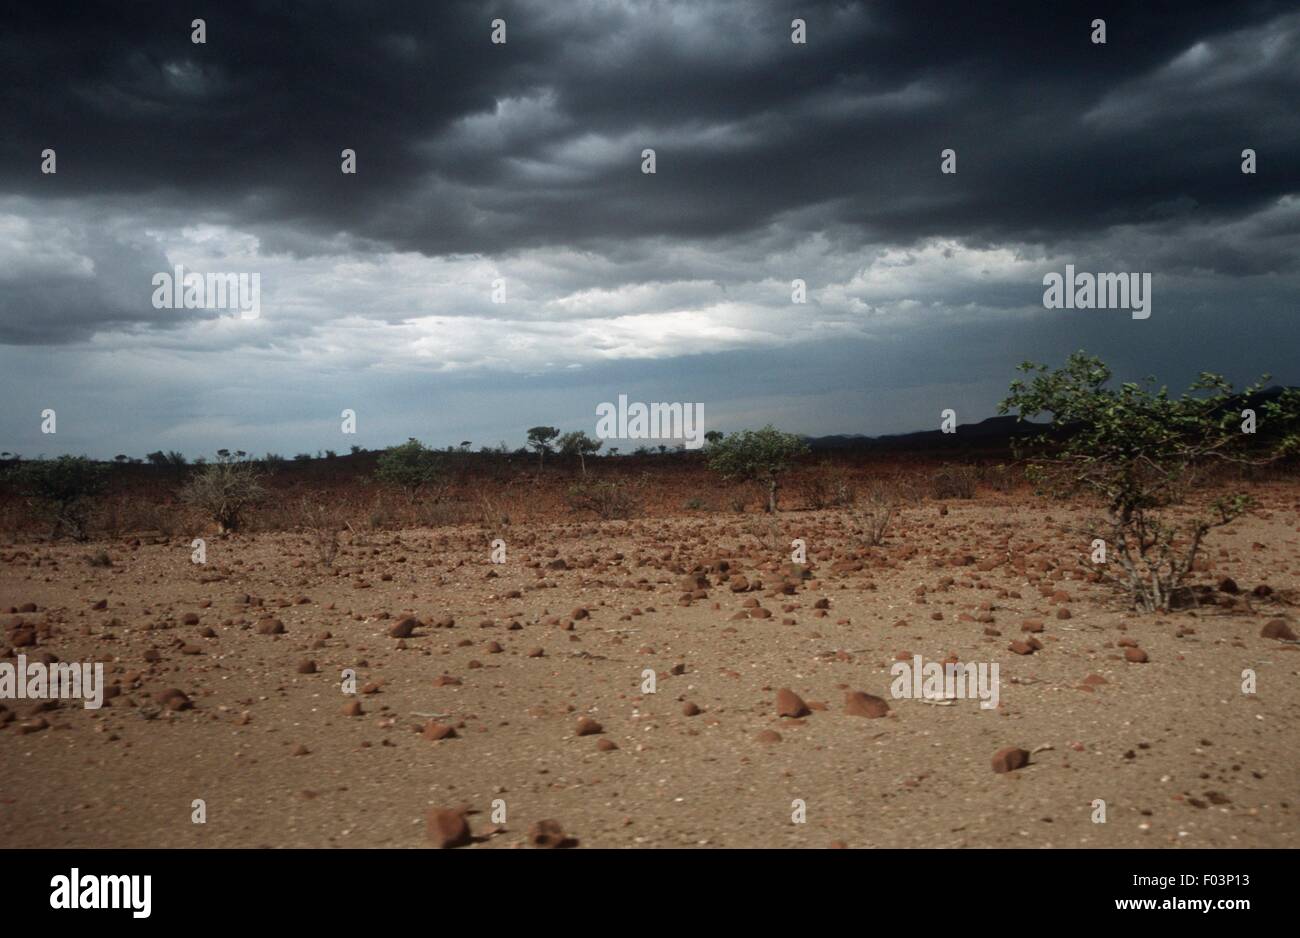 Namibia, Damaraland Wilderness Area, storm clouds over desert Stock Photo